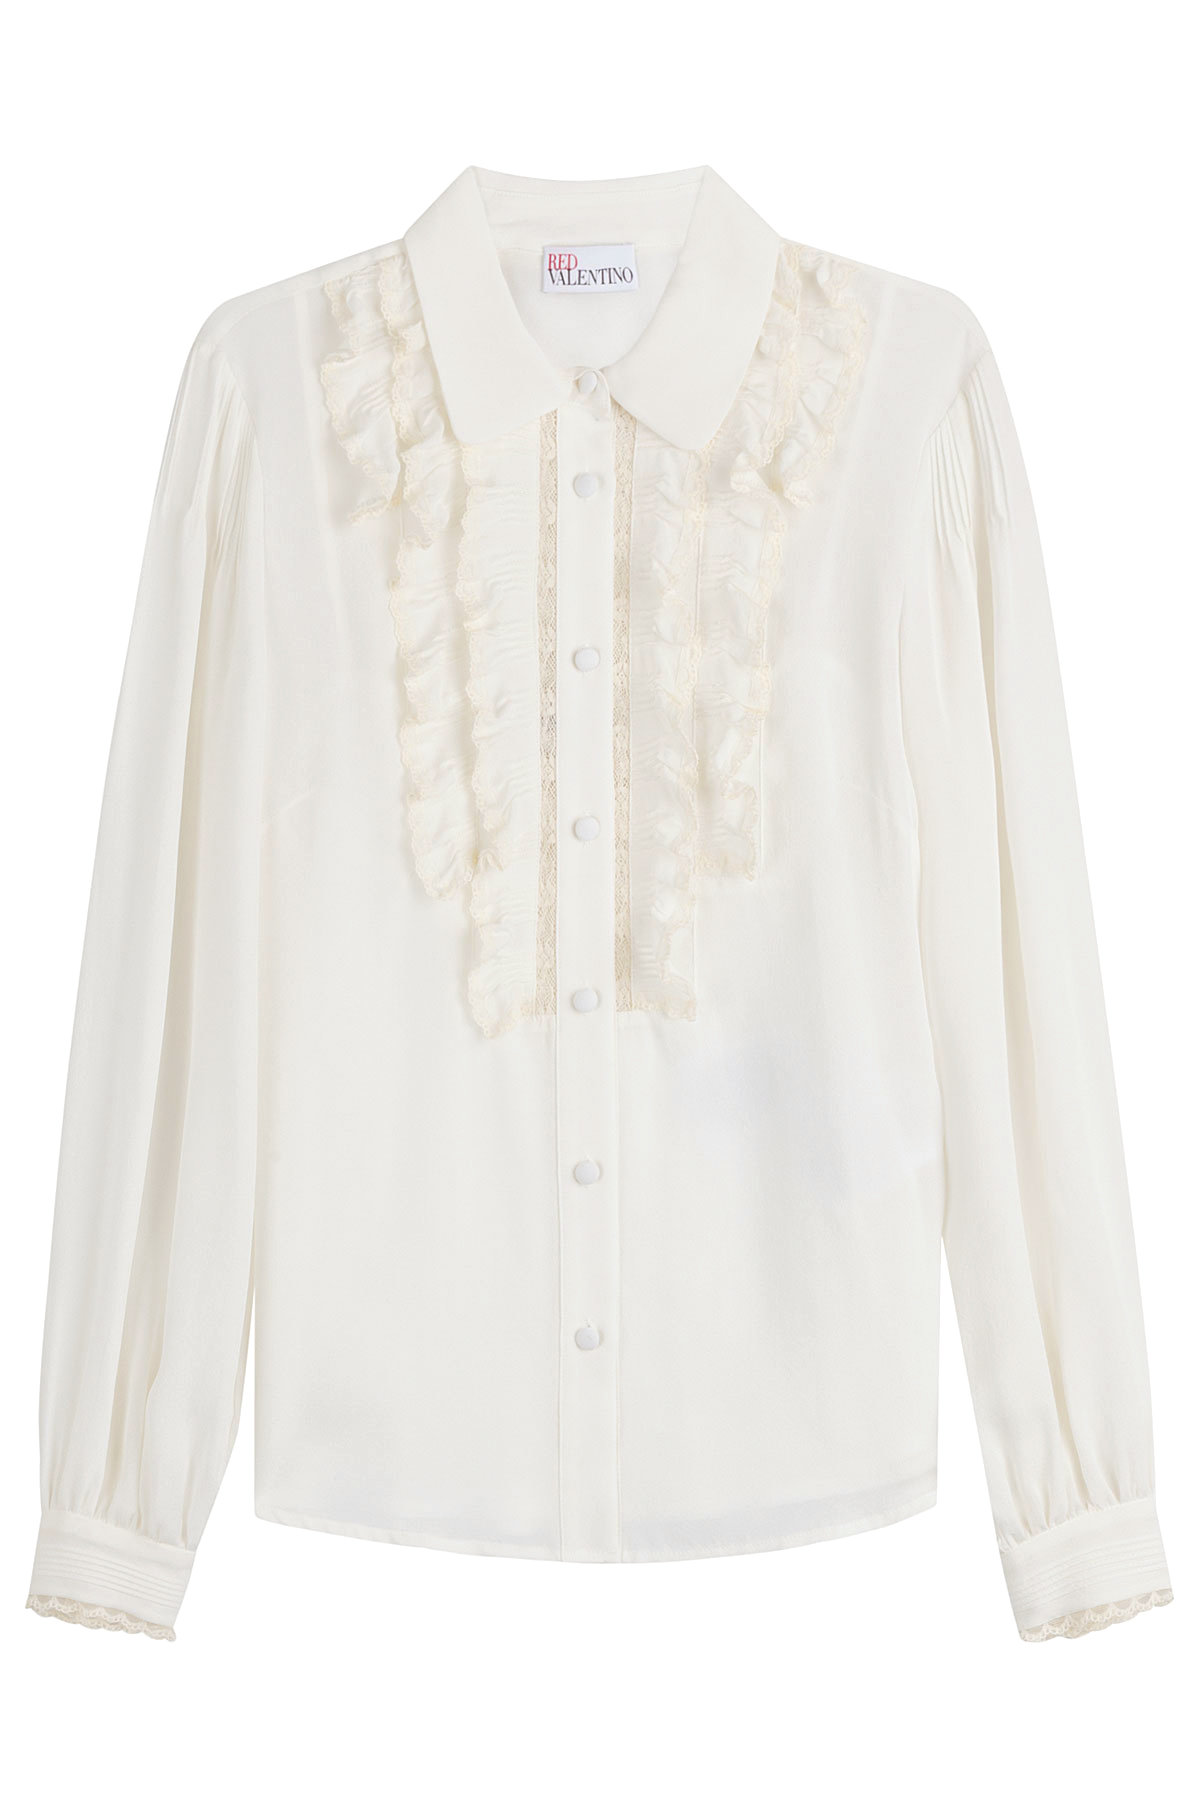 Red Valentino - Silk Blouse with Lace Ruffle Trim